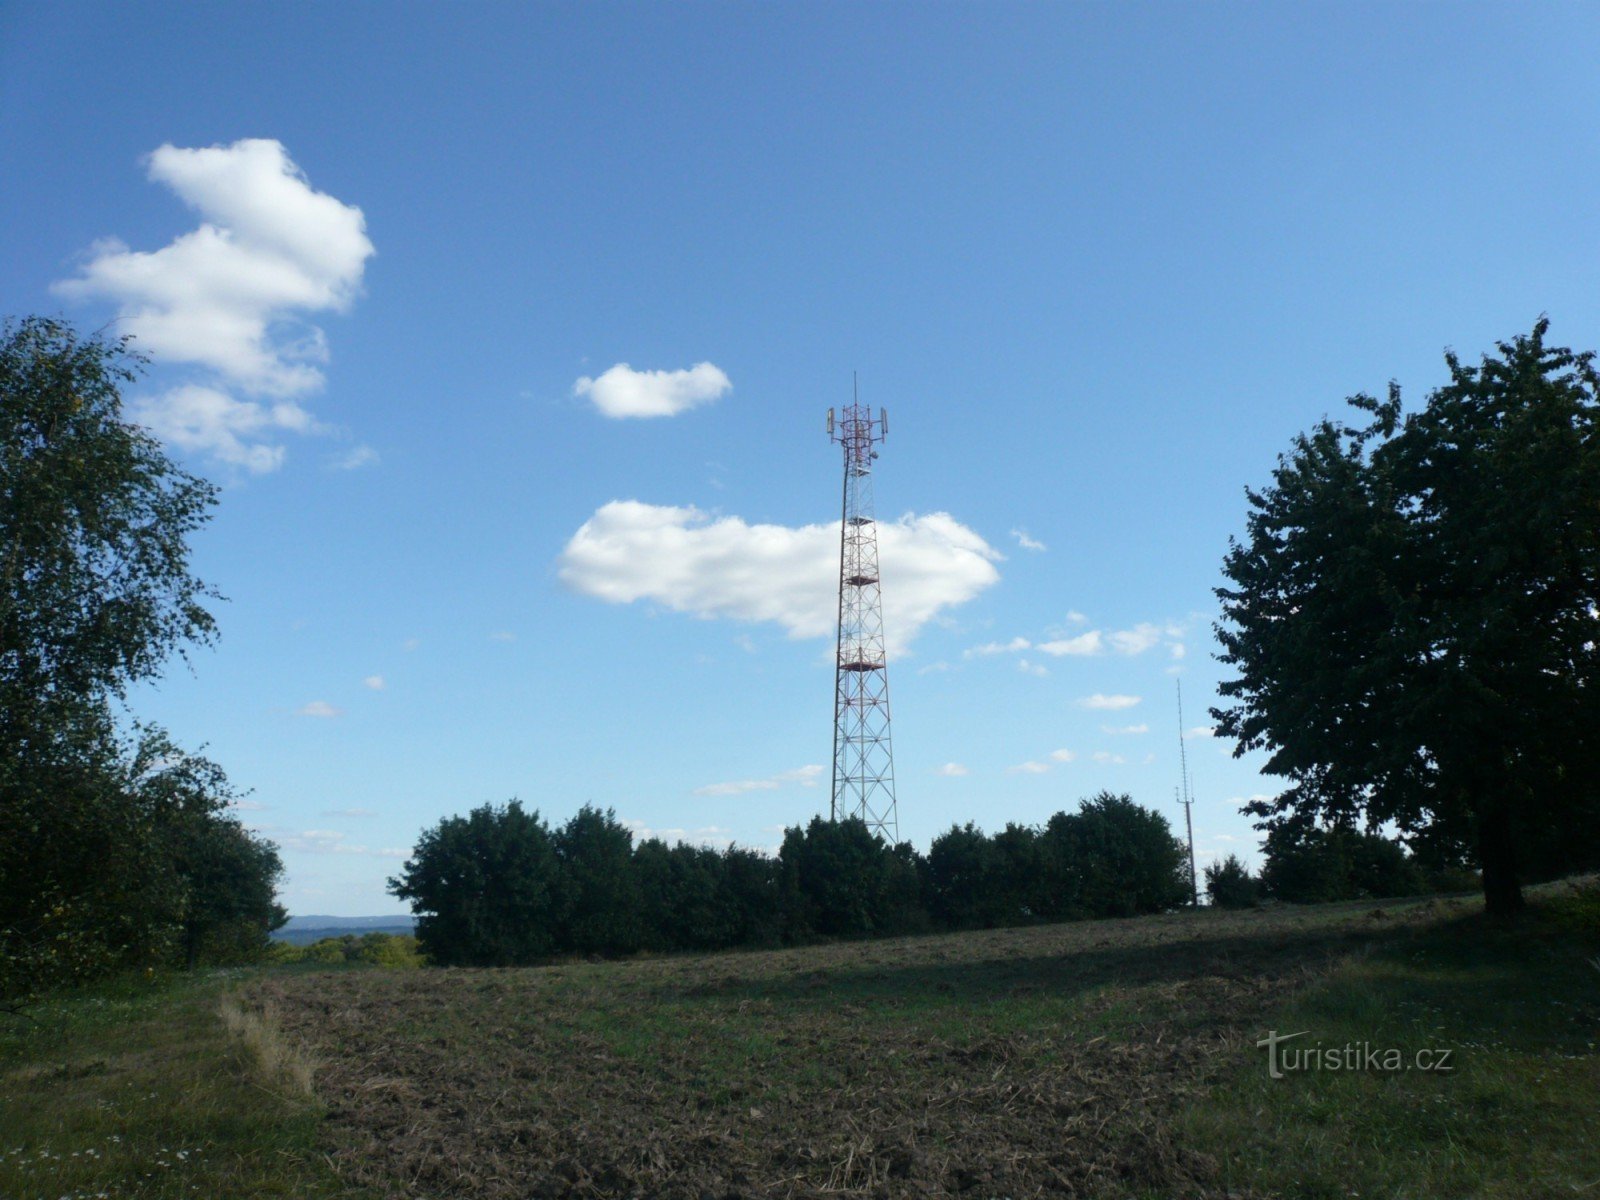 Even though this is a natural monument, the telecommunication mast cannot be missed here